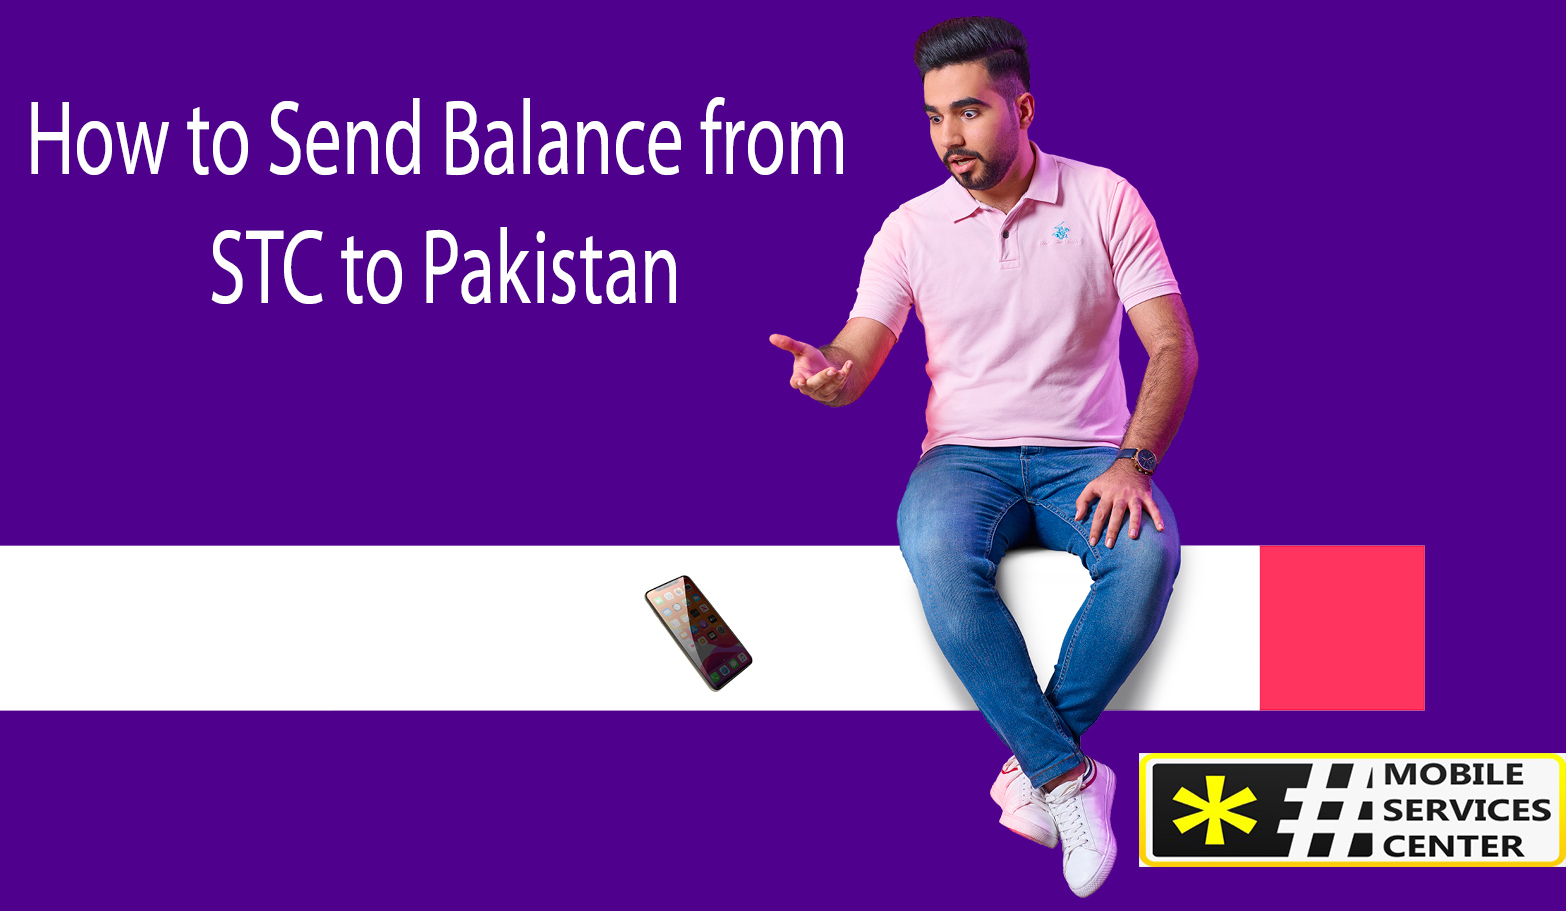 How to Send Balance from STC to Pakistan